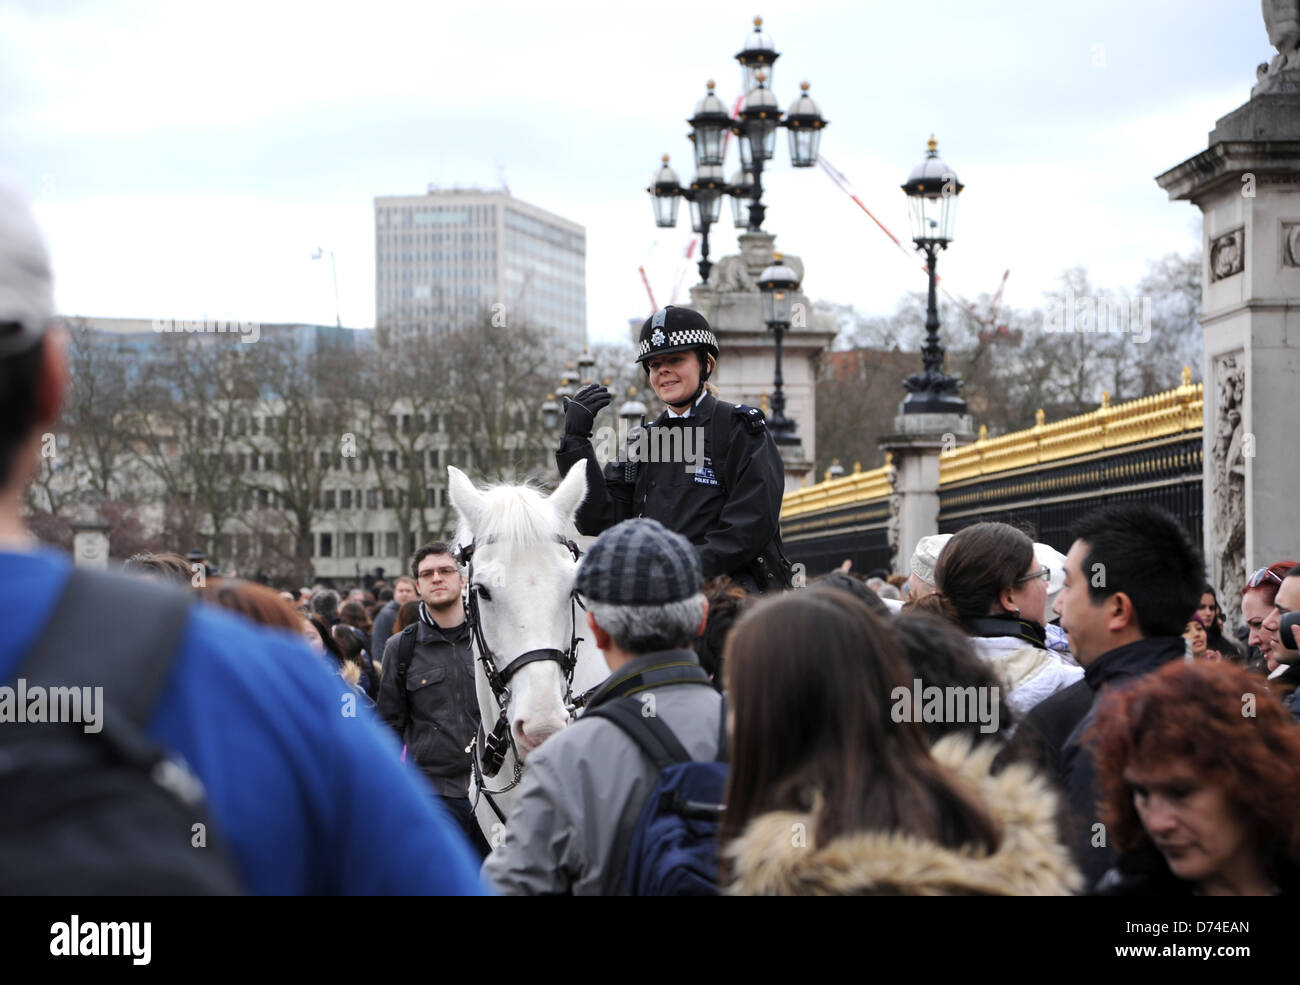 Female police officer on horseback helps with crowd control at the Changing of the Guard at Buckingham Palace in London UK Stock Photo